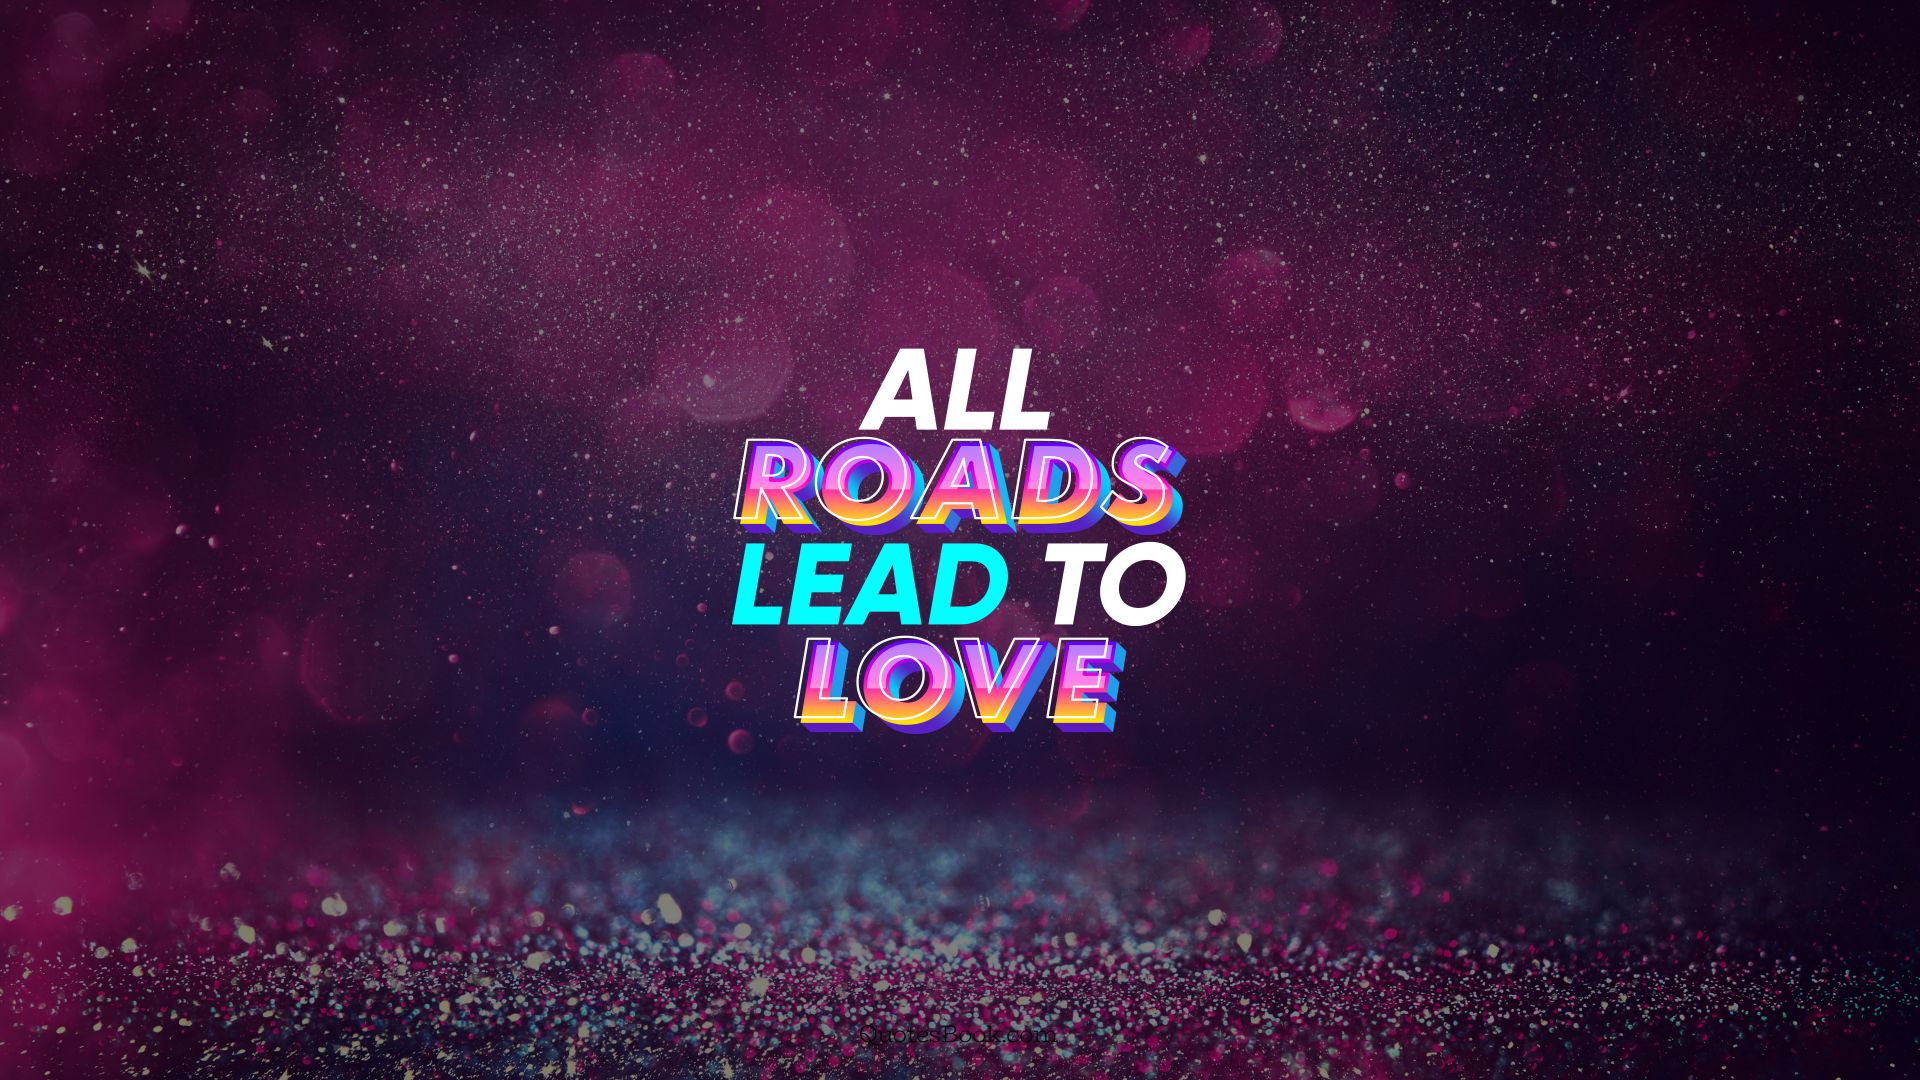 All roads lead to love. - Quote by QuotesBook